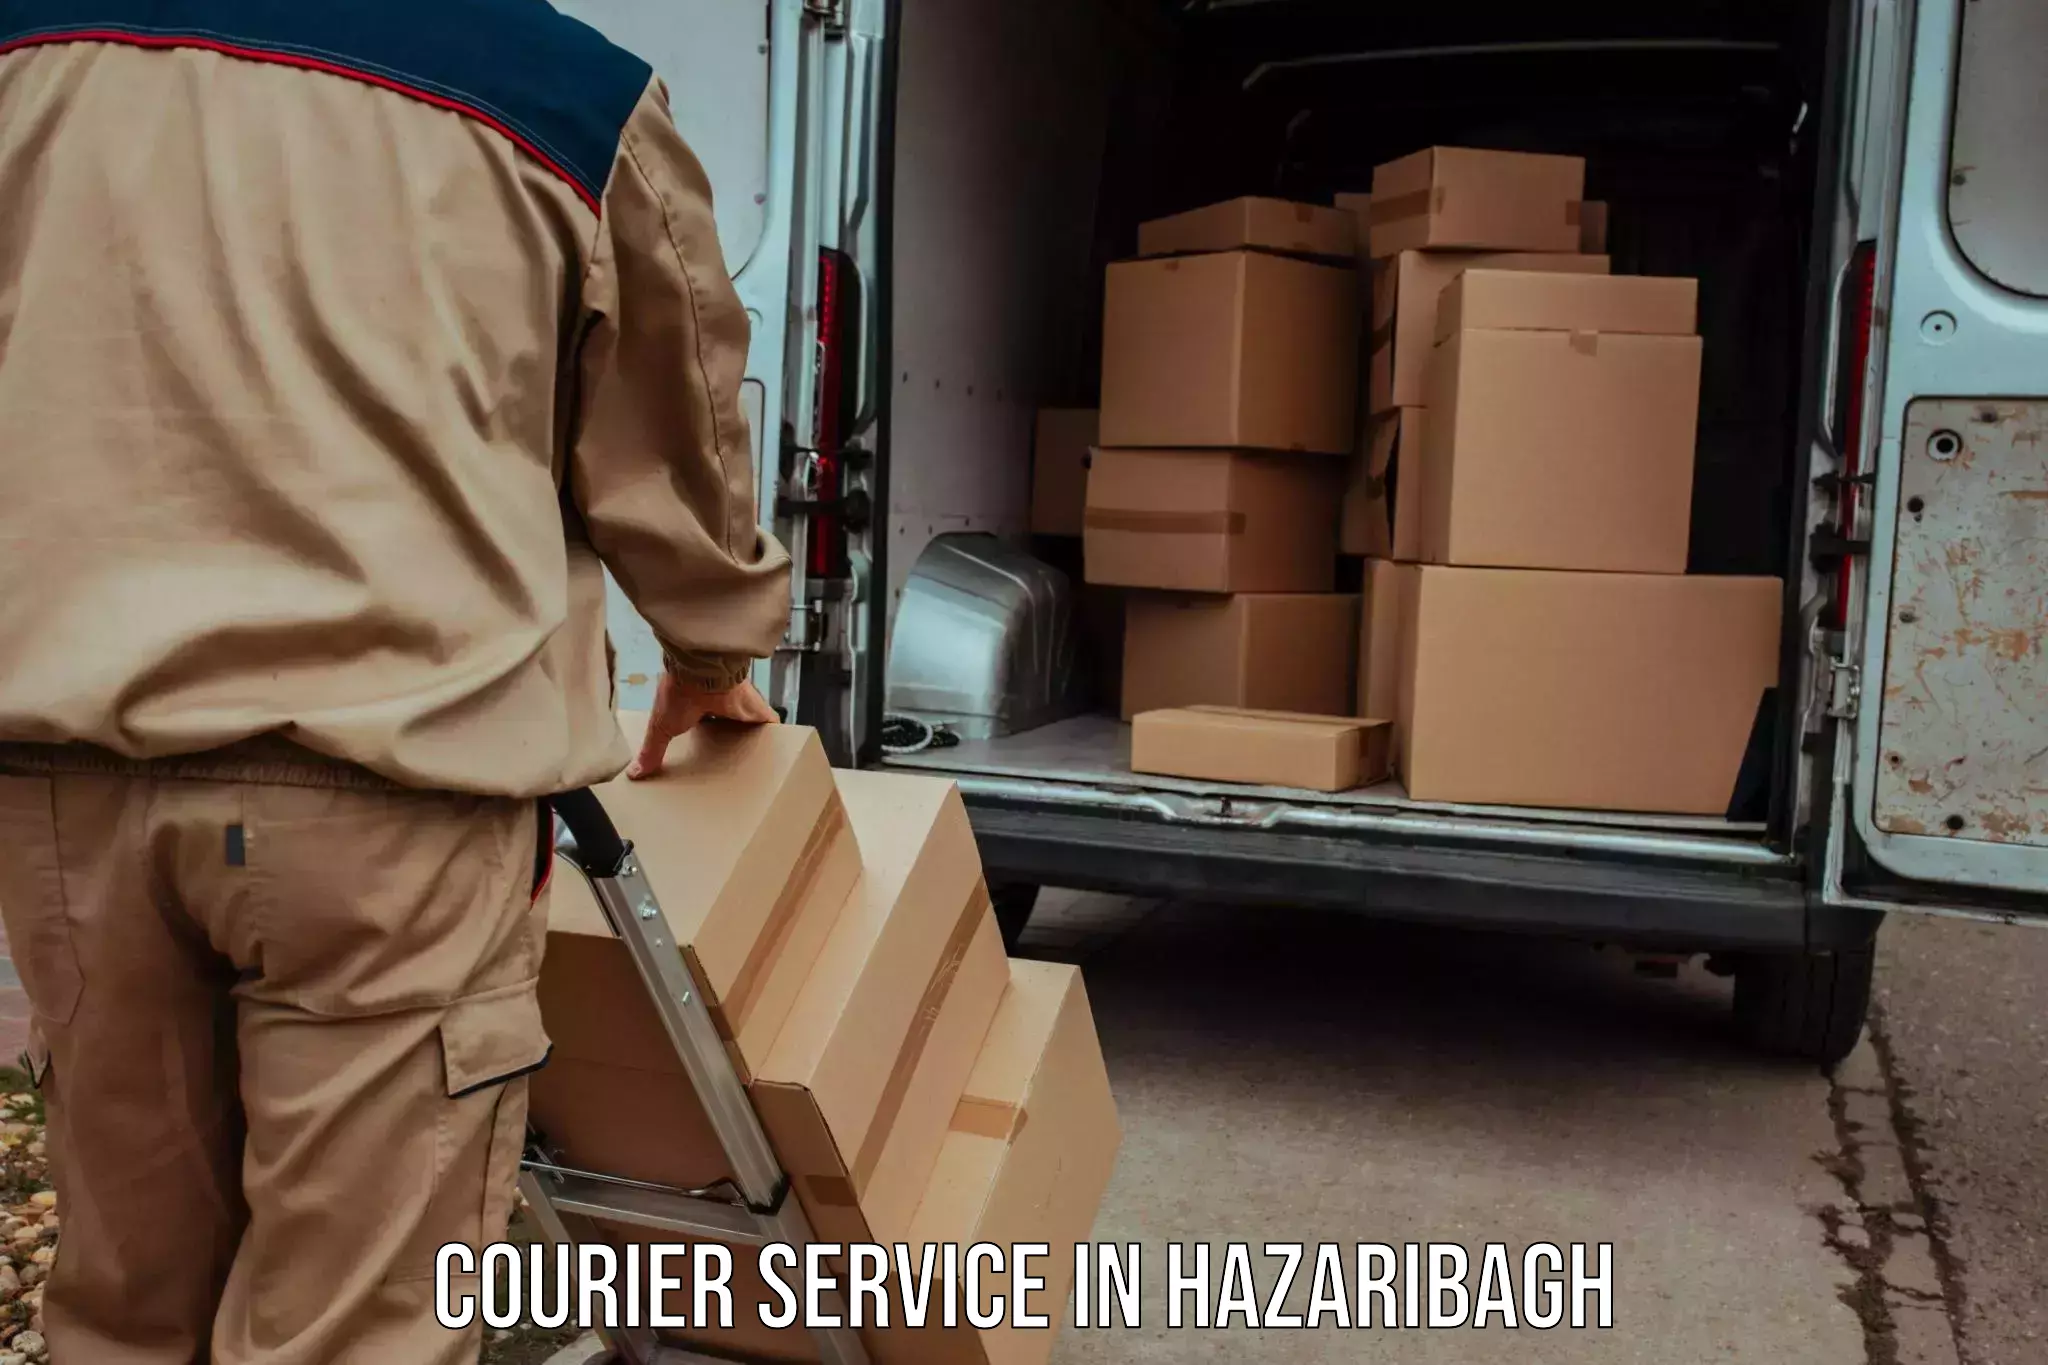 E-commerce logistics support in Hazaribagh